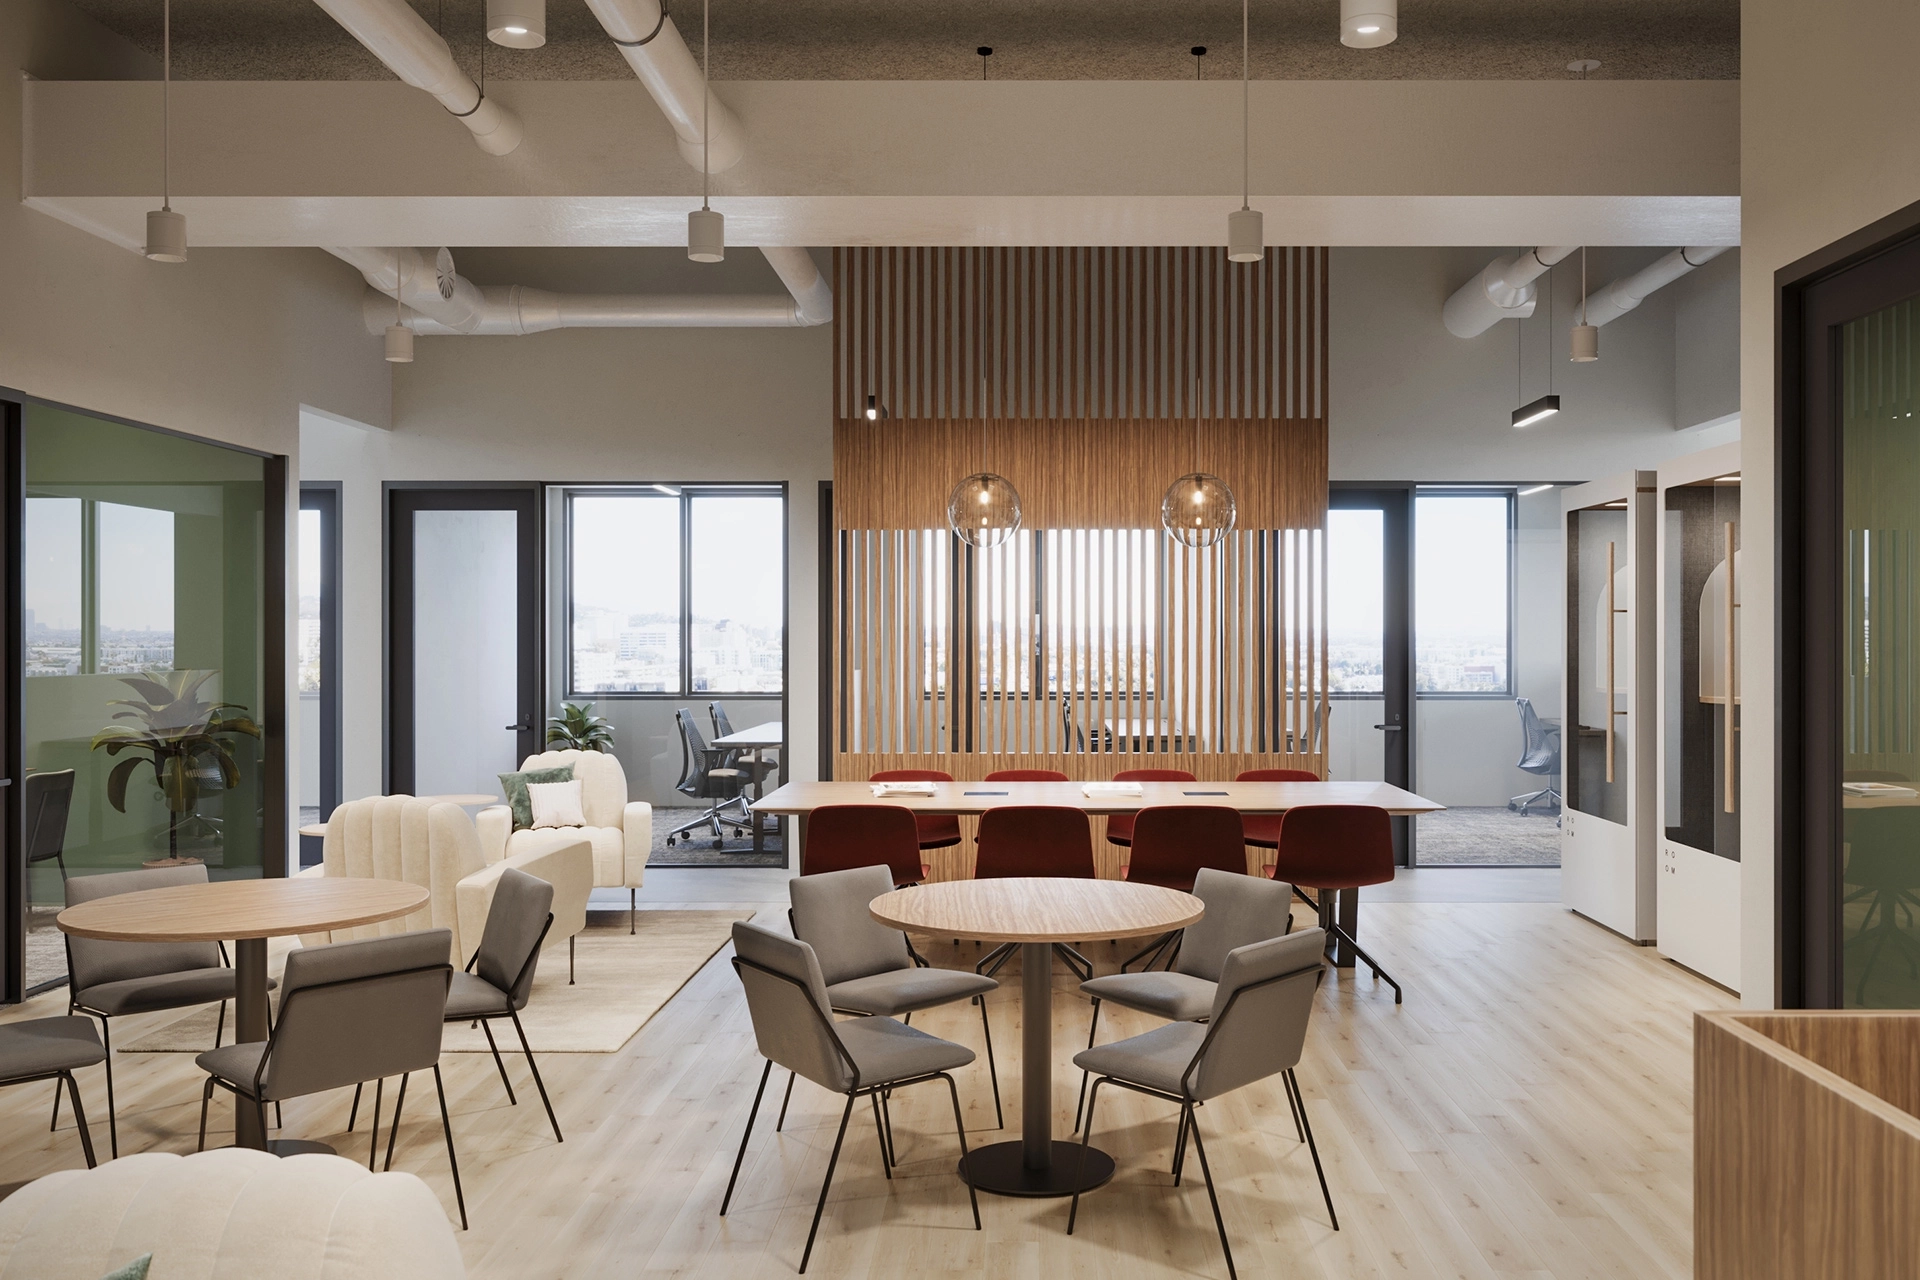 Modern office workspace with varied seating styles, wood accents and pendant lighting. Large windows offer views of the Los Angeles skyline.